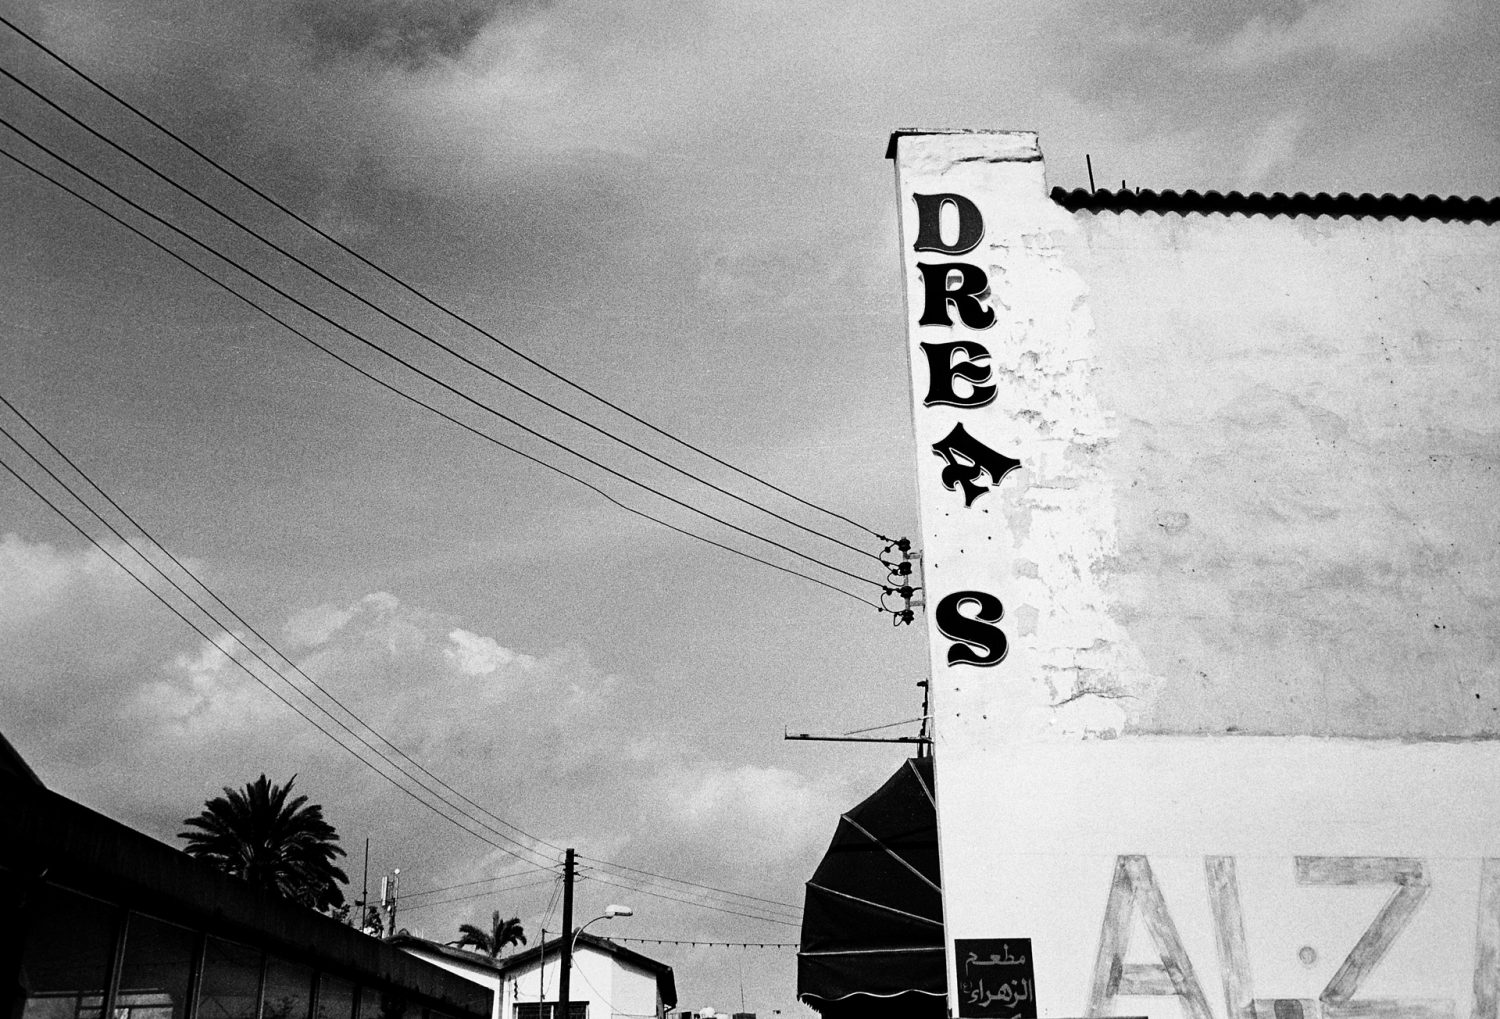 Broken Dreams – The Architecture of War Cyprus, 2009 to 2012. Silver gelatin print.